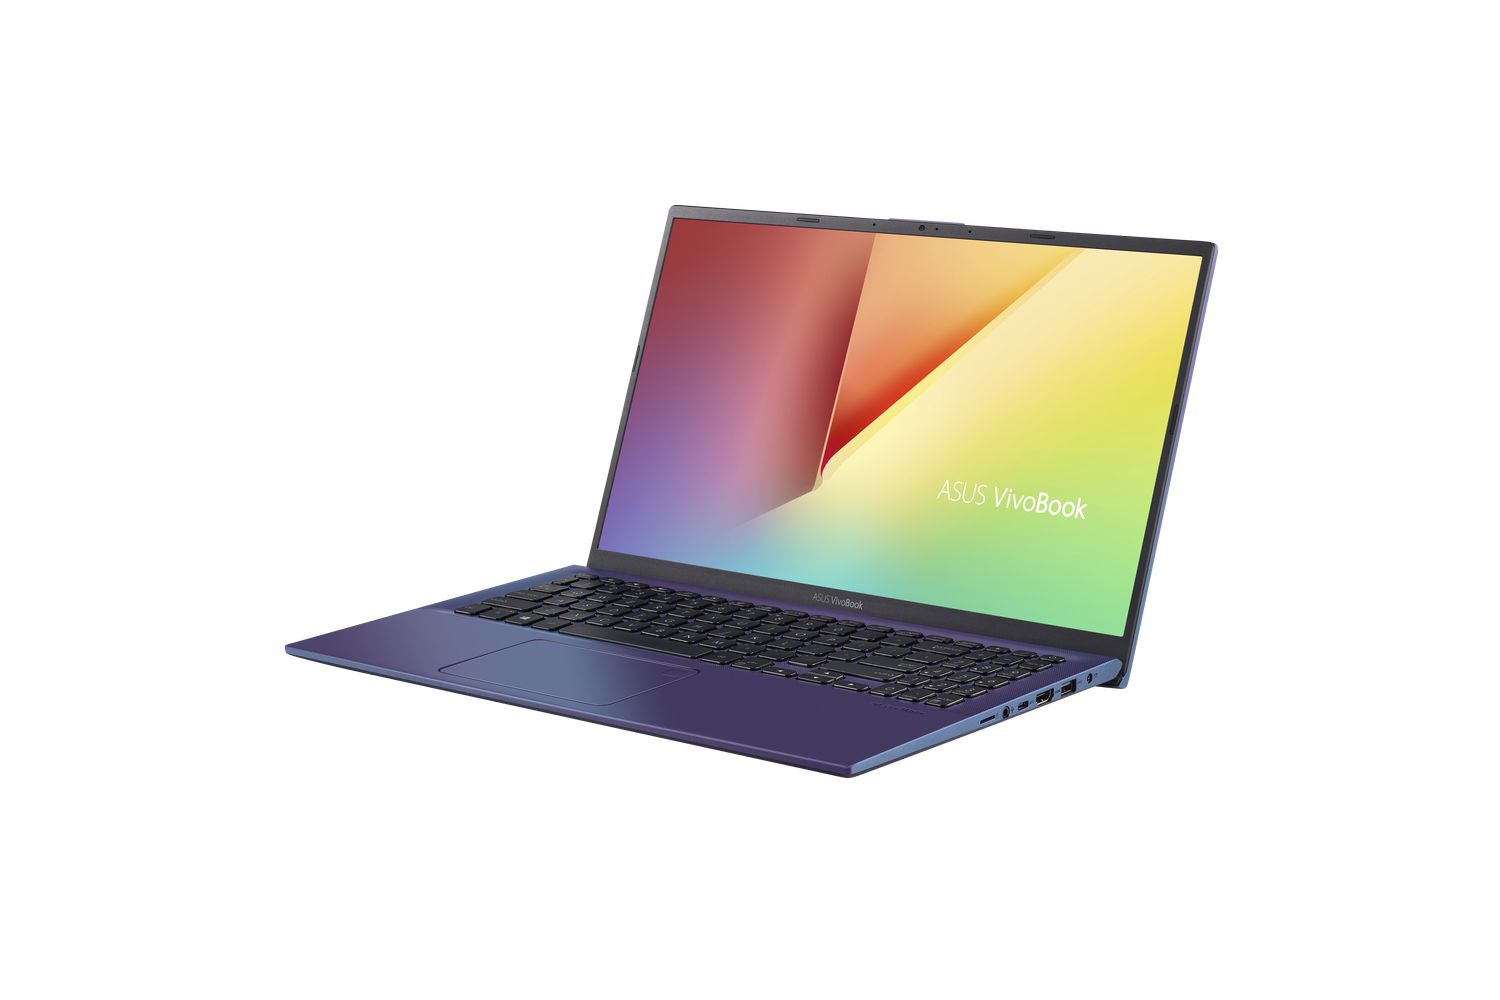 asus introduces zenbook s13 with thinnest bezels ces 2019 vivobook 14 15 uncomproming performance discrete nvidia graphics